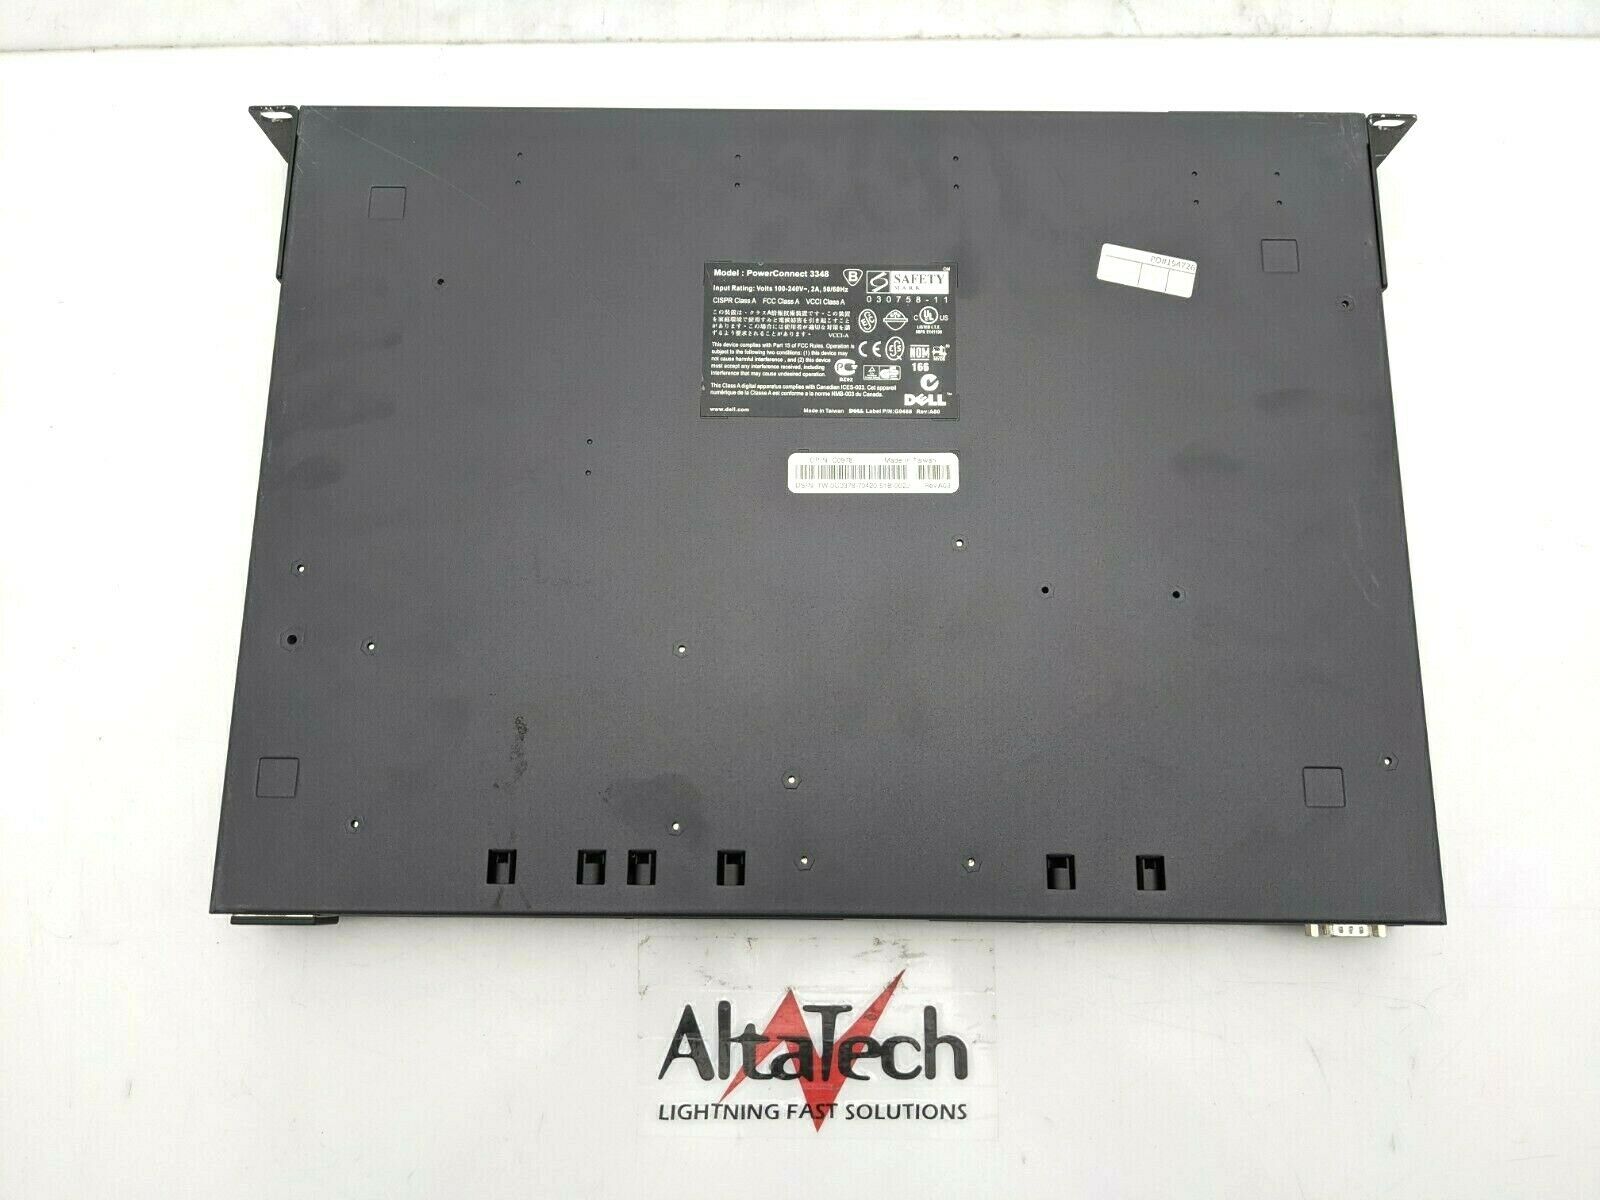 Dell C0978 PowerConnect 3348 48-Port 10/100 Network Switch, Used